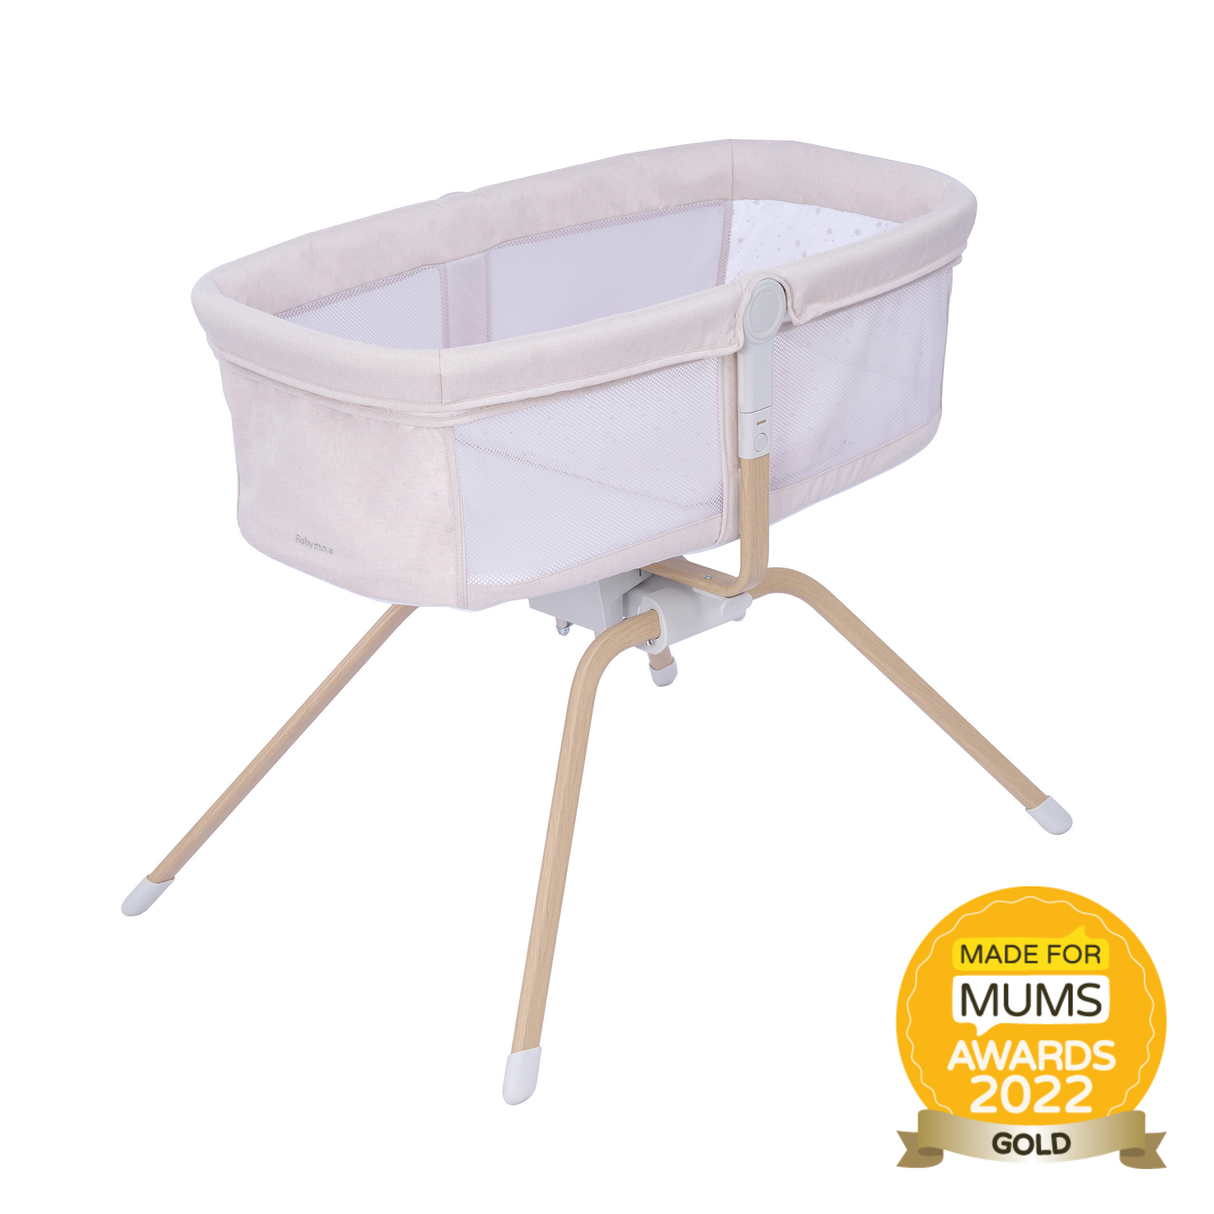 Baby Crib - Air Motion Gliding Crib in Cream from Babymore with MadeForMums Gold Award